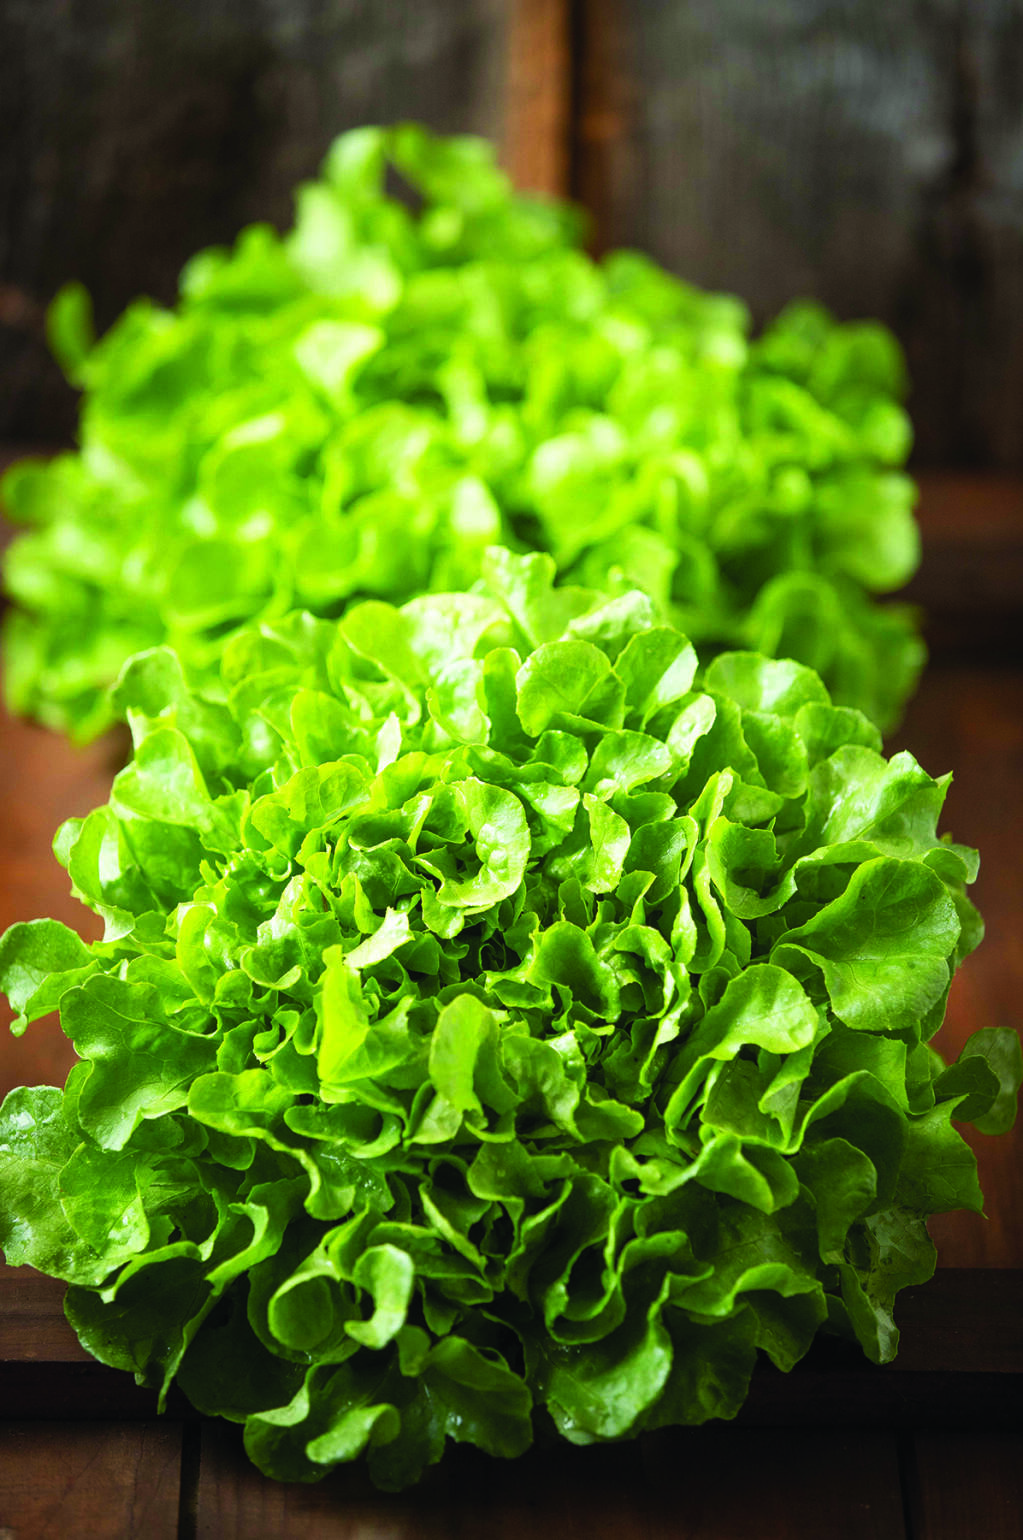 Lettuce ‘Bauer’ grows a head perfectly sized for a single serving salad (Johnnyseeds.com)